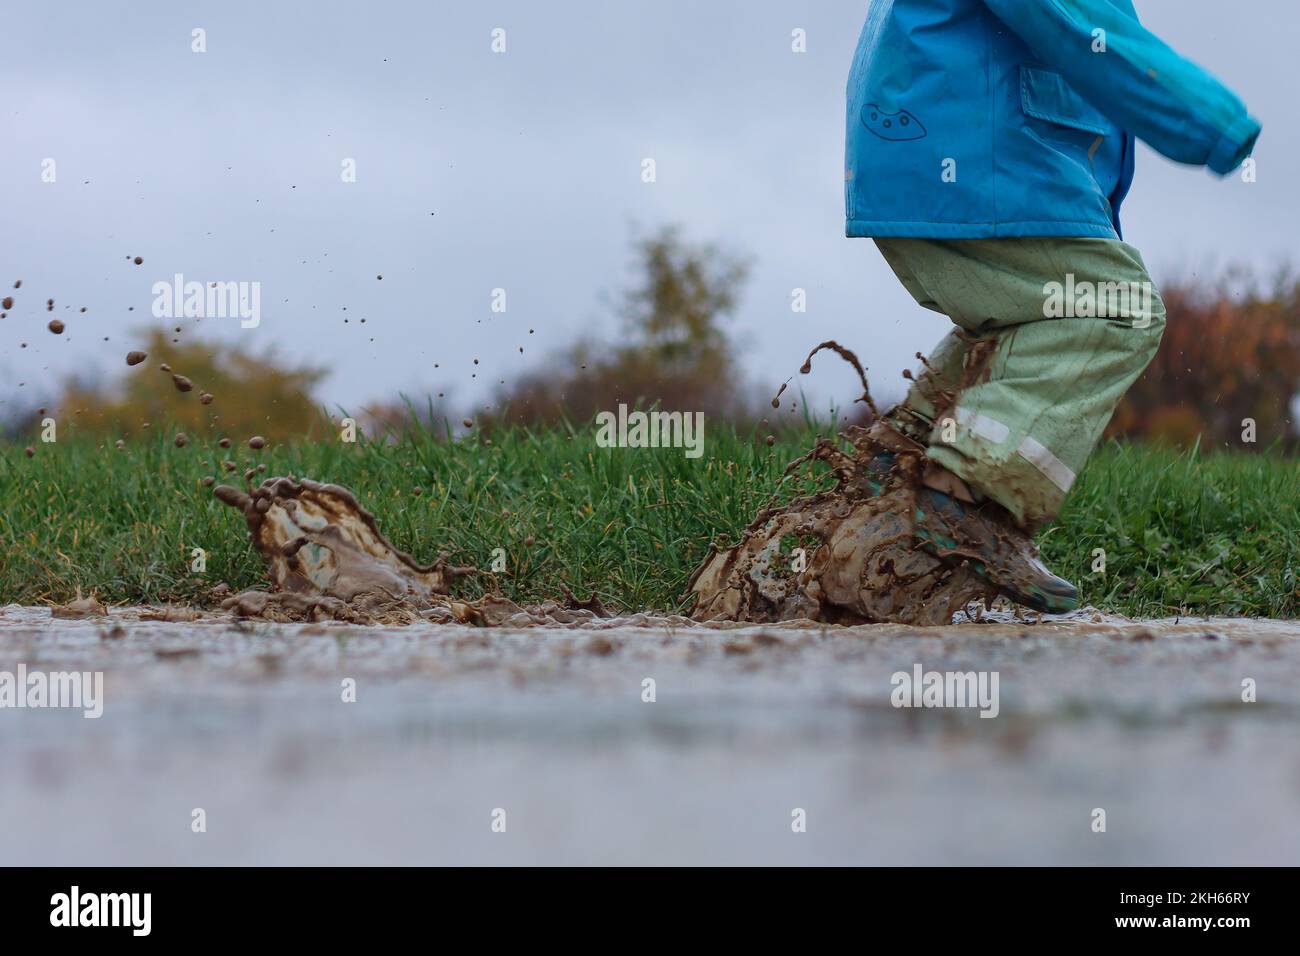 Jumping in mud puddles, it splashes properly Stock Photo